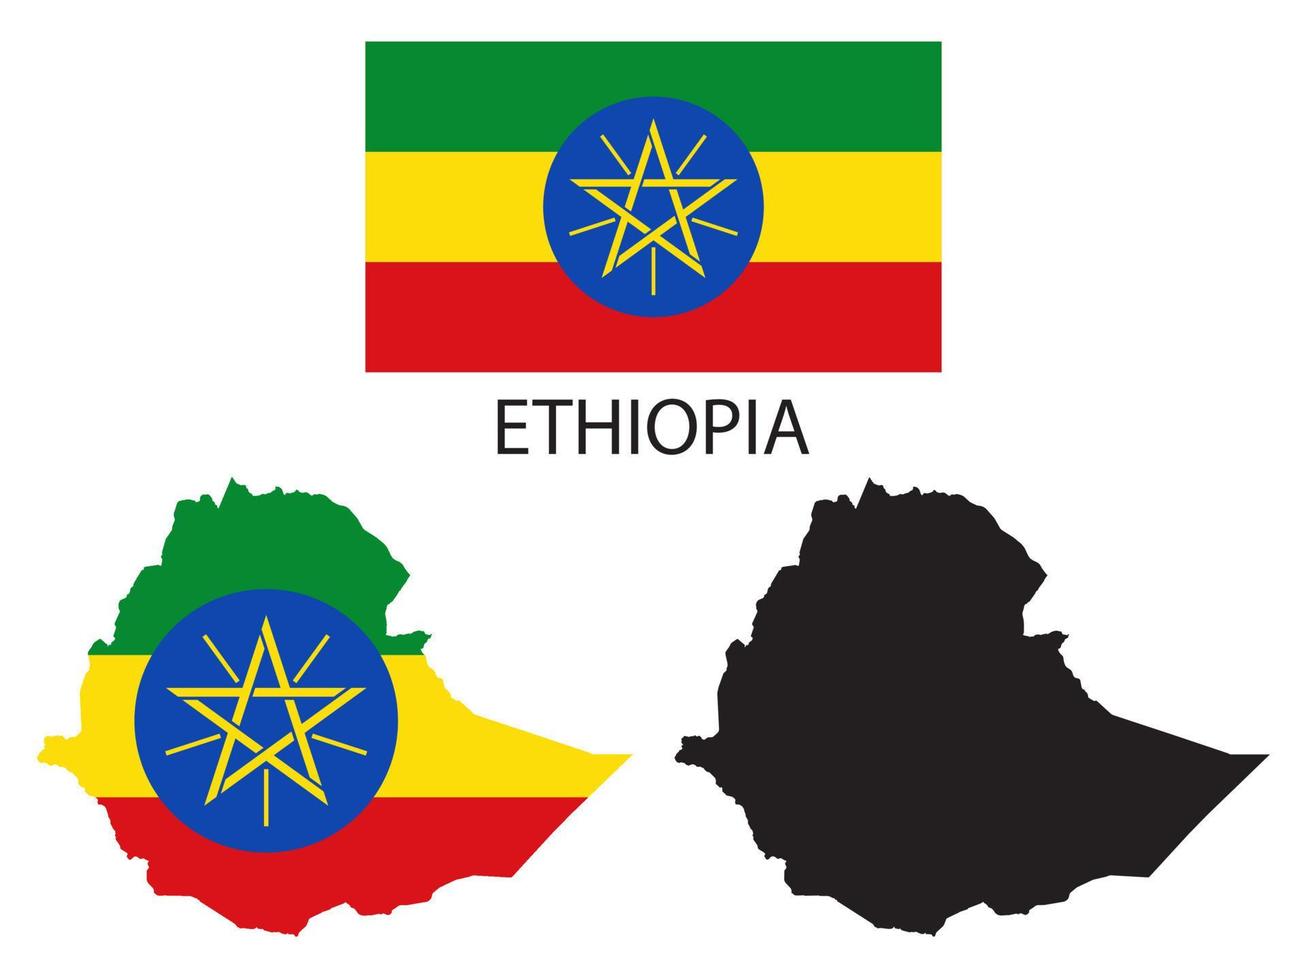 ETHIOPIA flag and map illustration vector